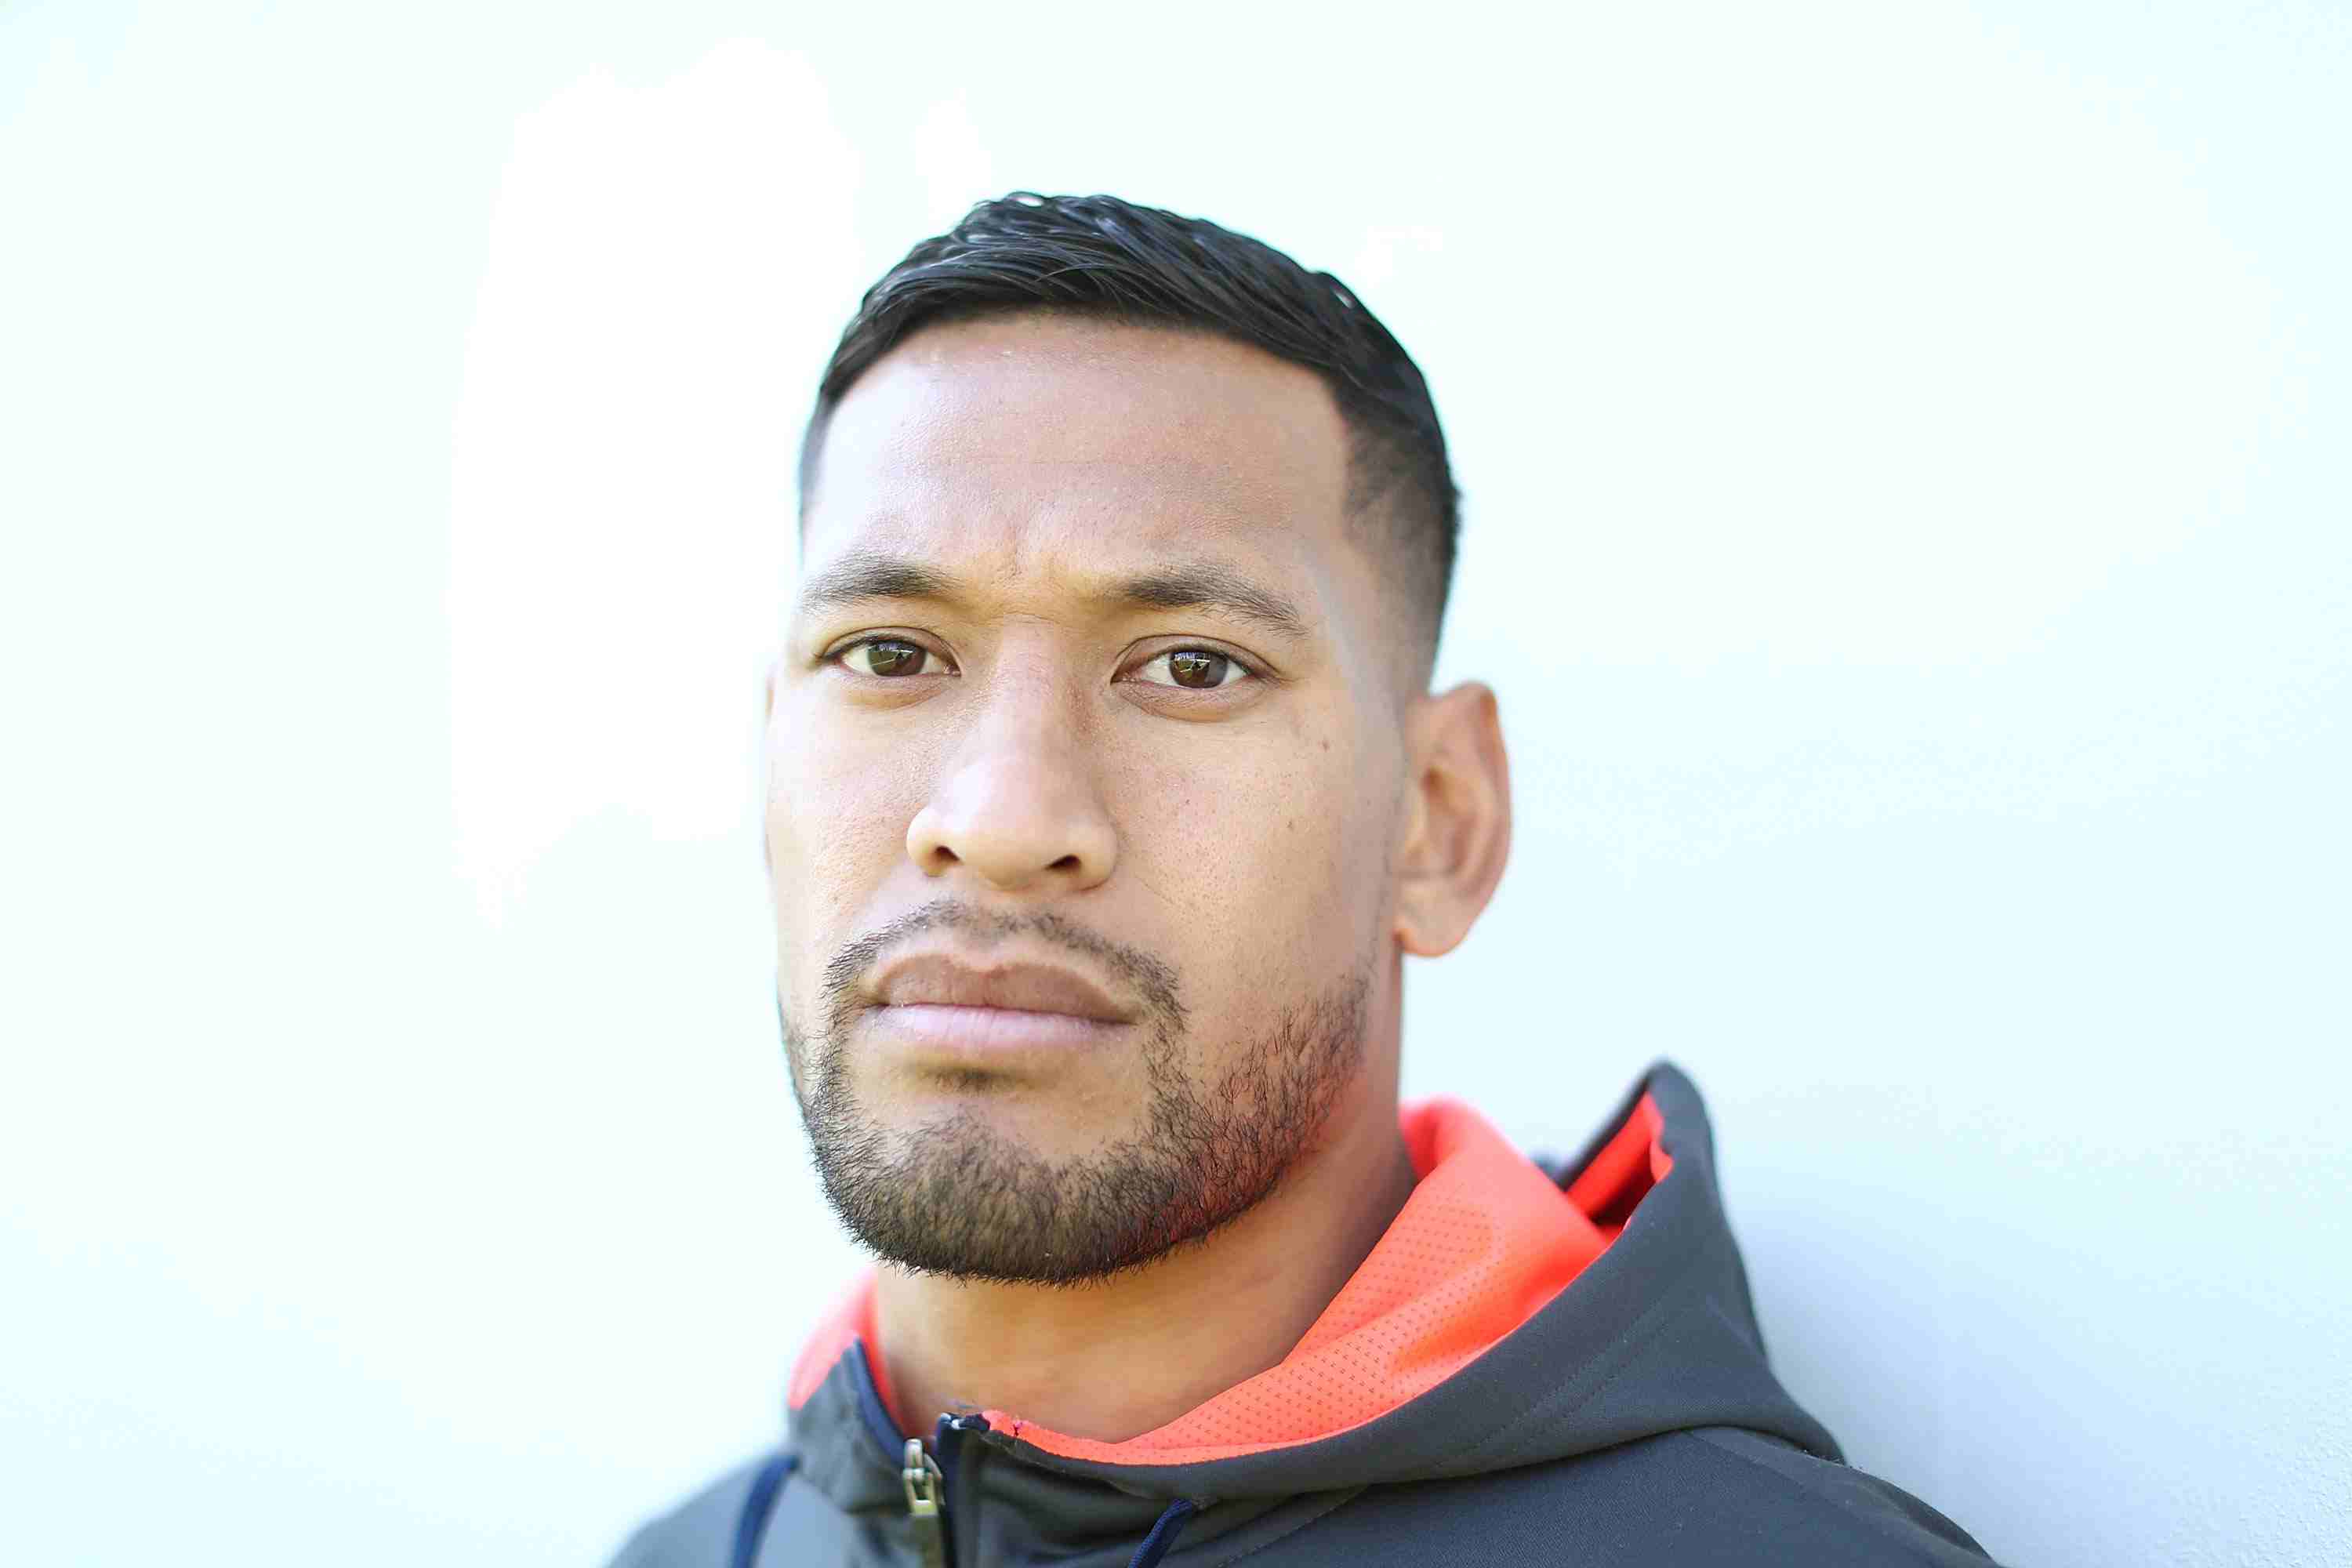 "I have been left with no choice": Israel Folau commences legal action